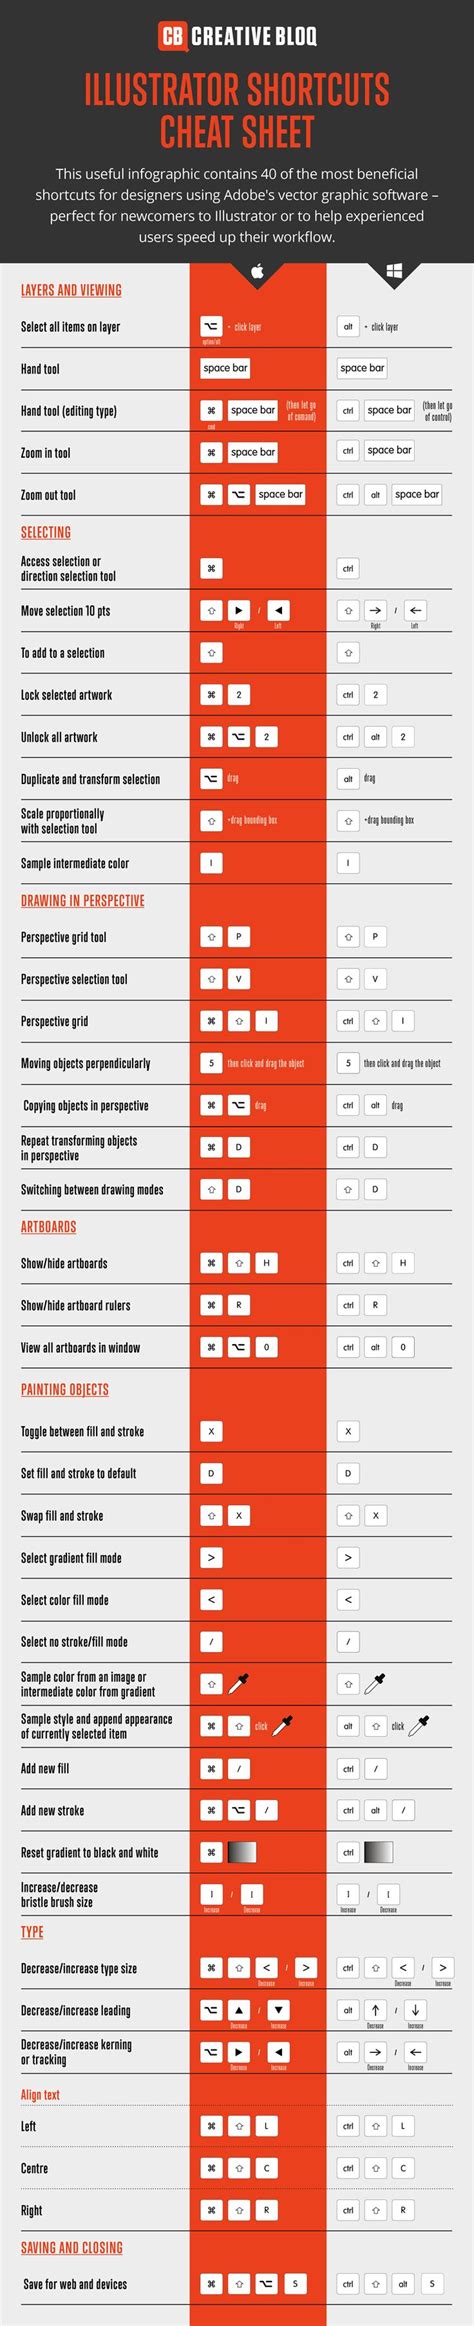 Infographic 40 Incredibly Useful Illustrator Shortcuts Infographic